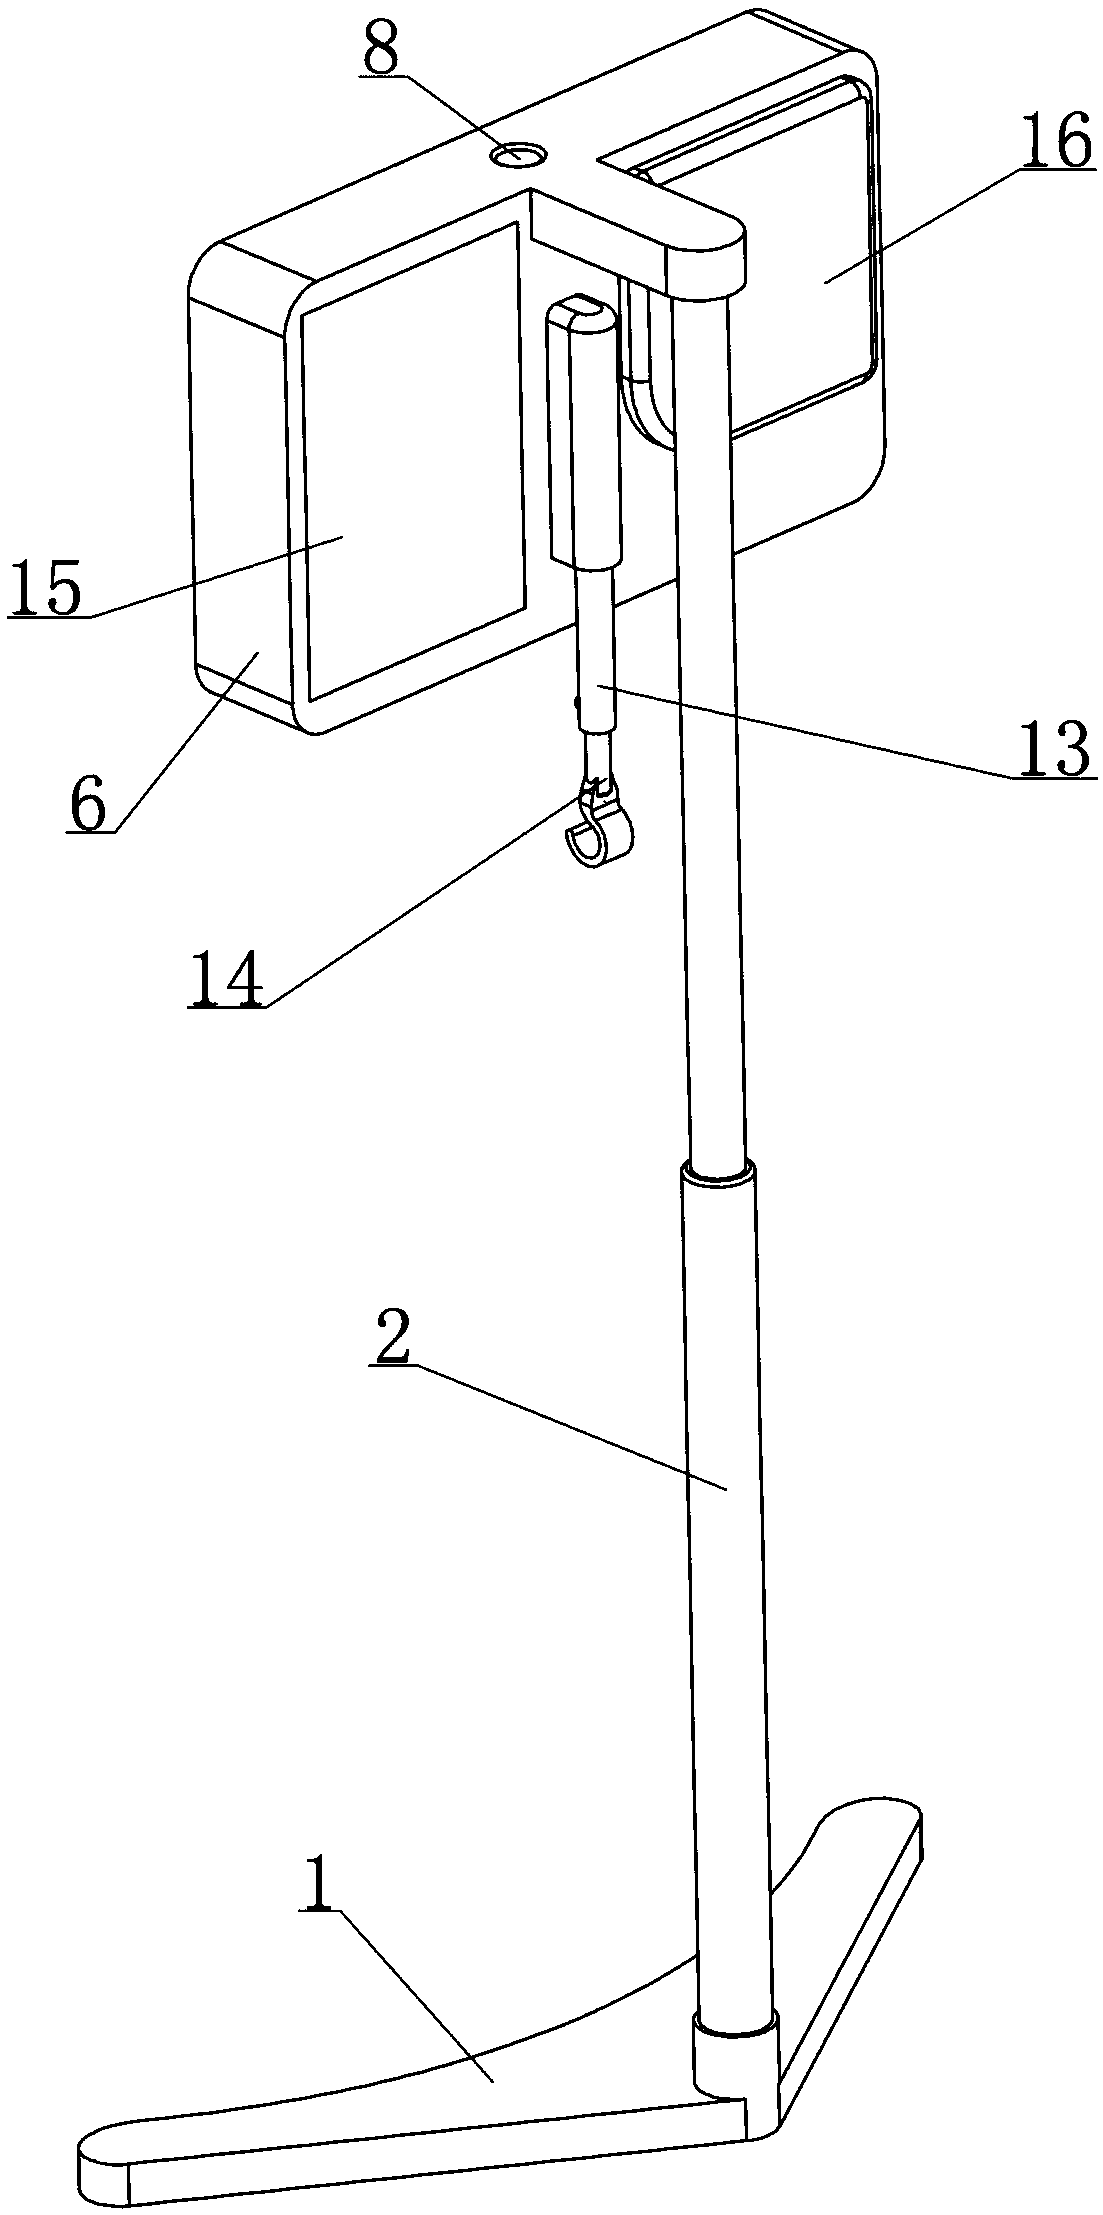 Full-automatic medical drainage device